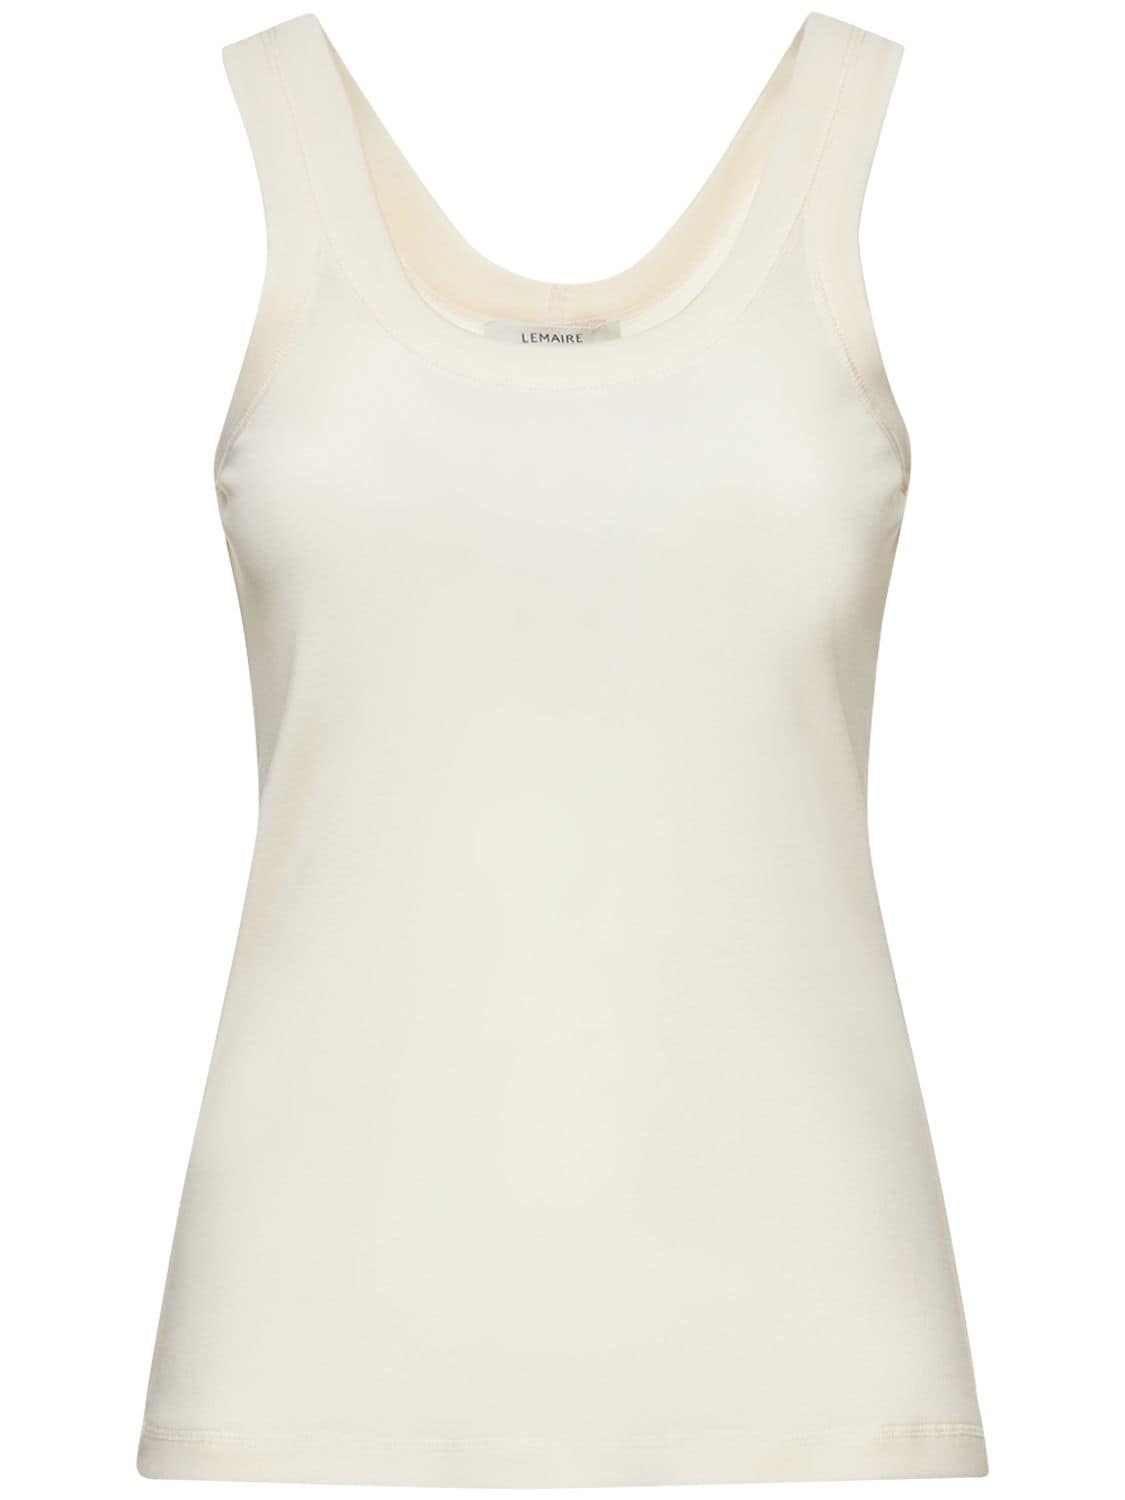 LEMAIRE RIB COTTON JERSEY TANK TOP